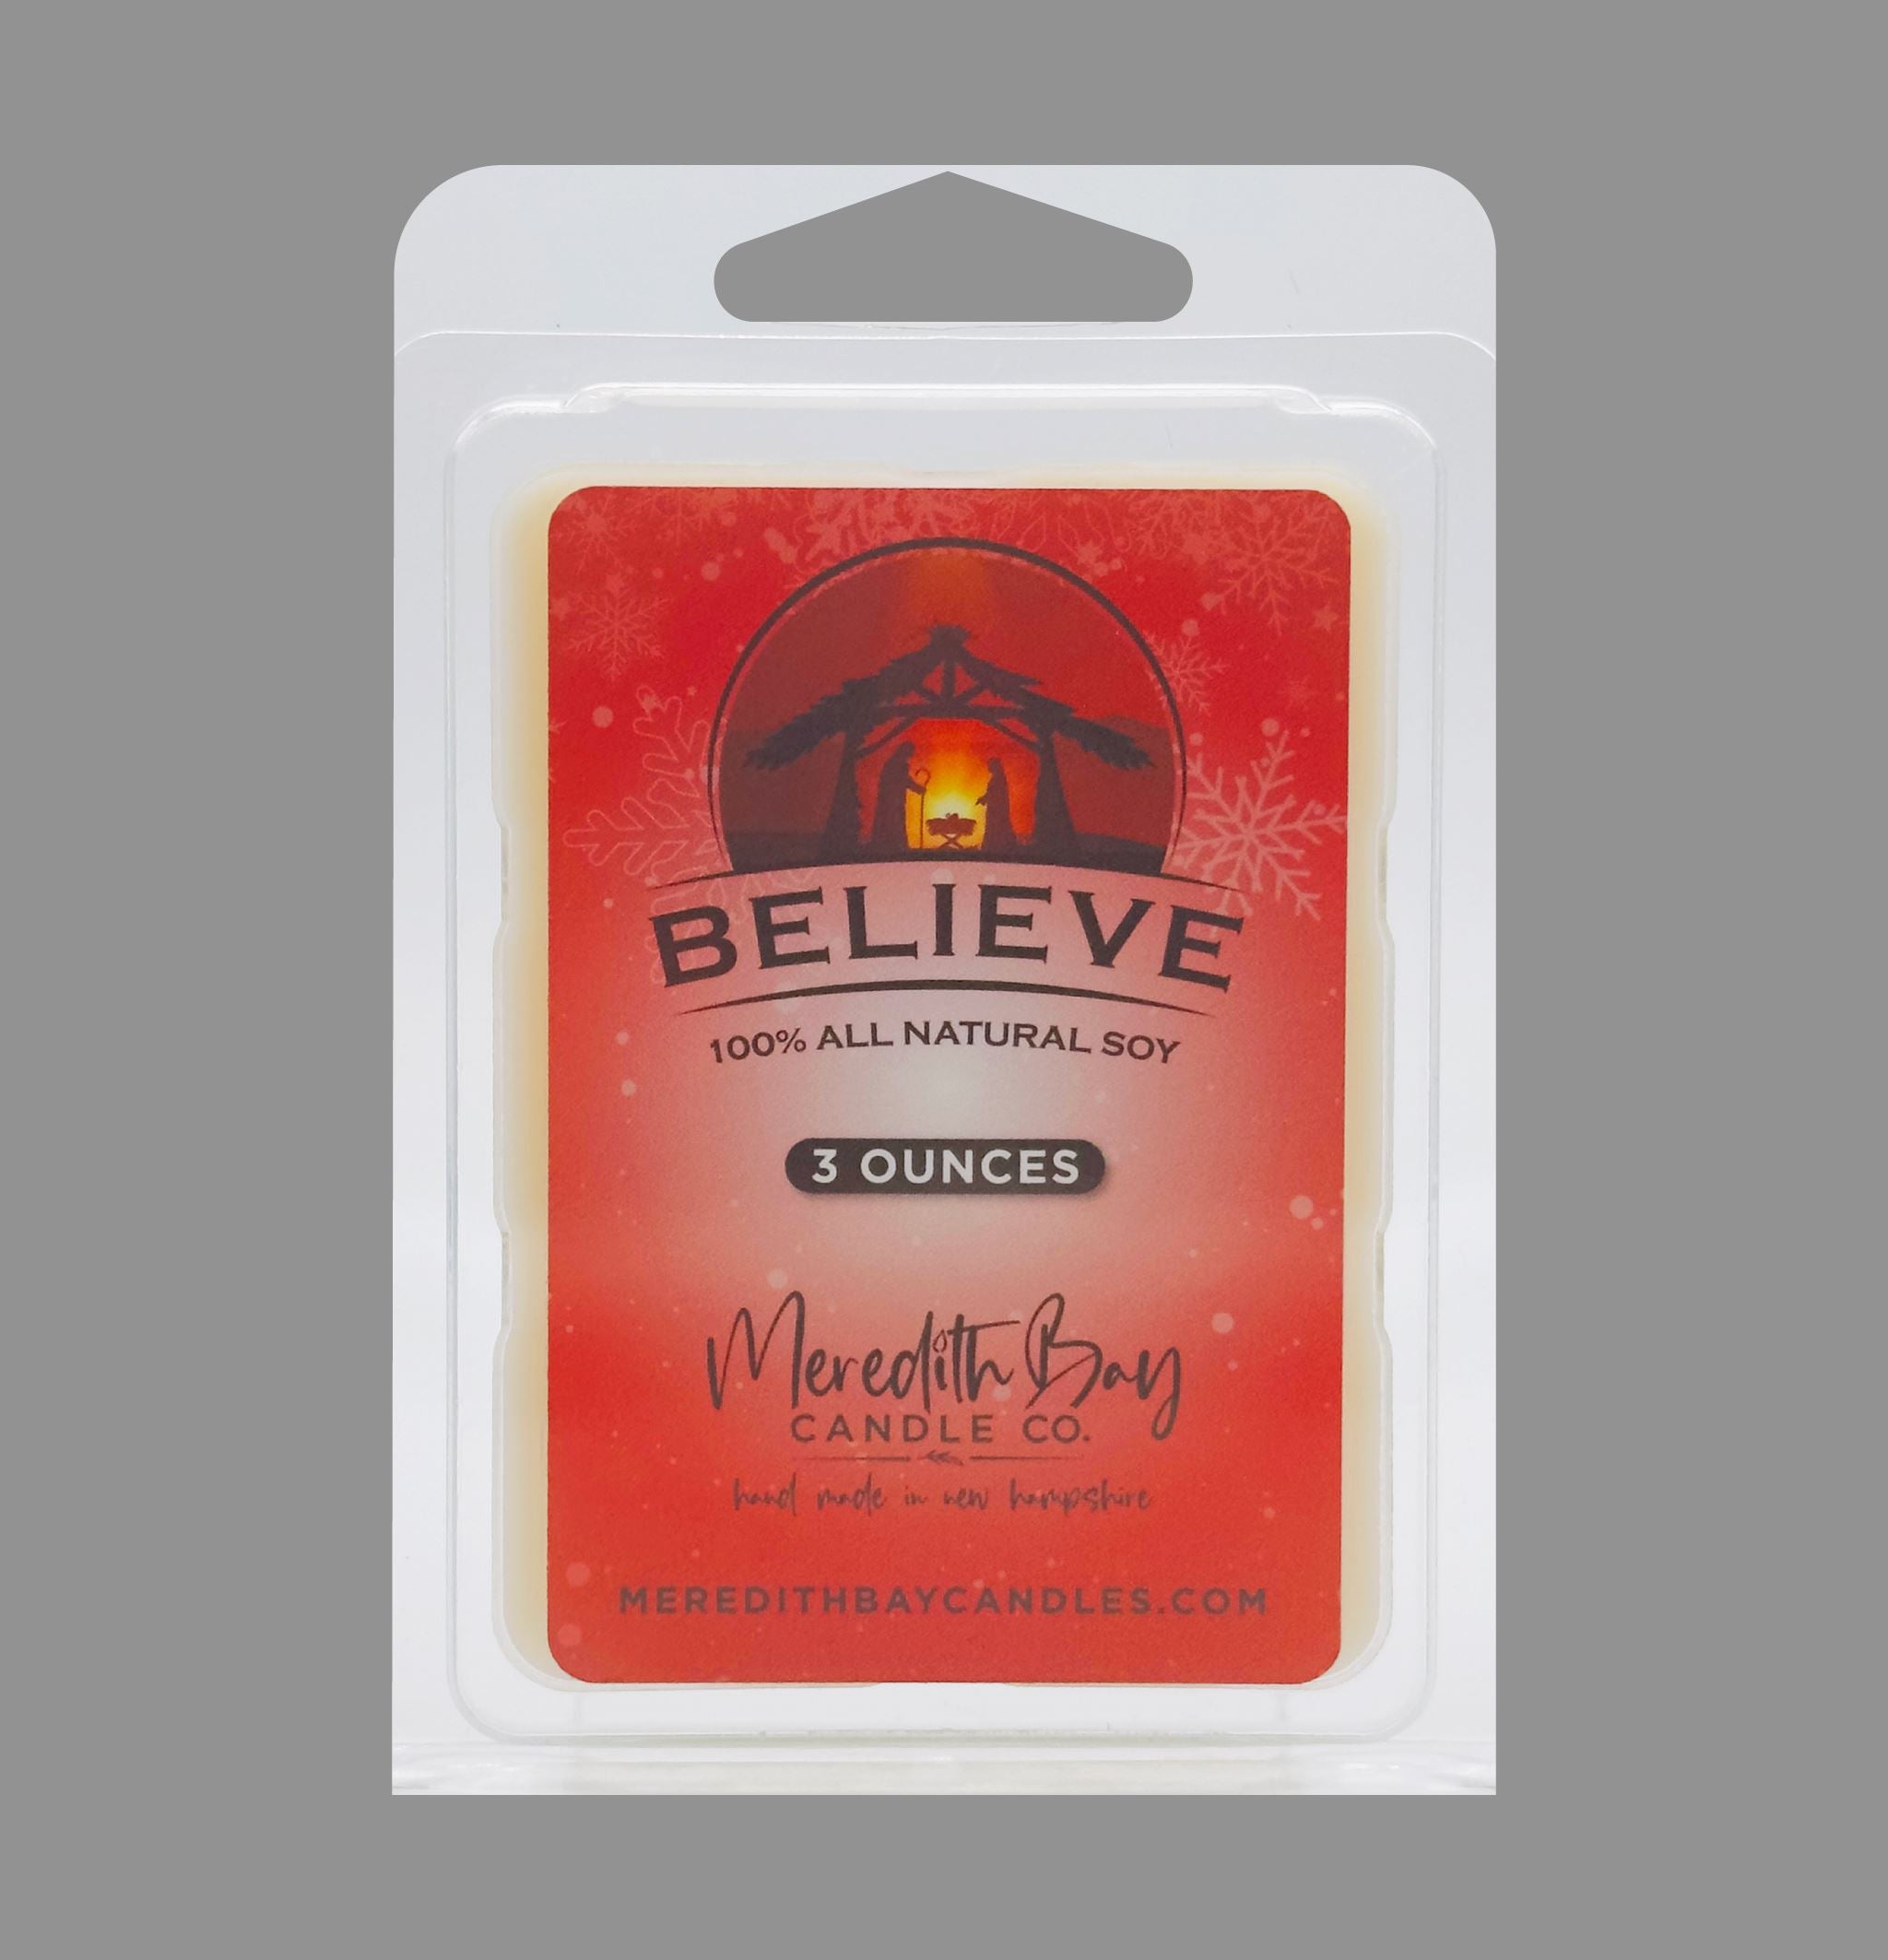 Believe Wax Melt Meredith Bay Candle Co 